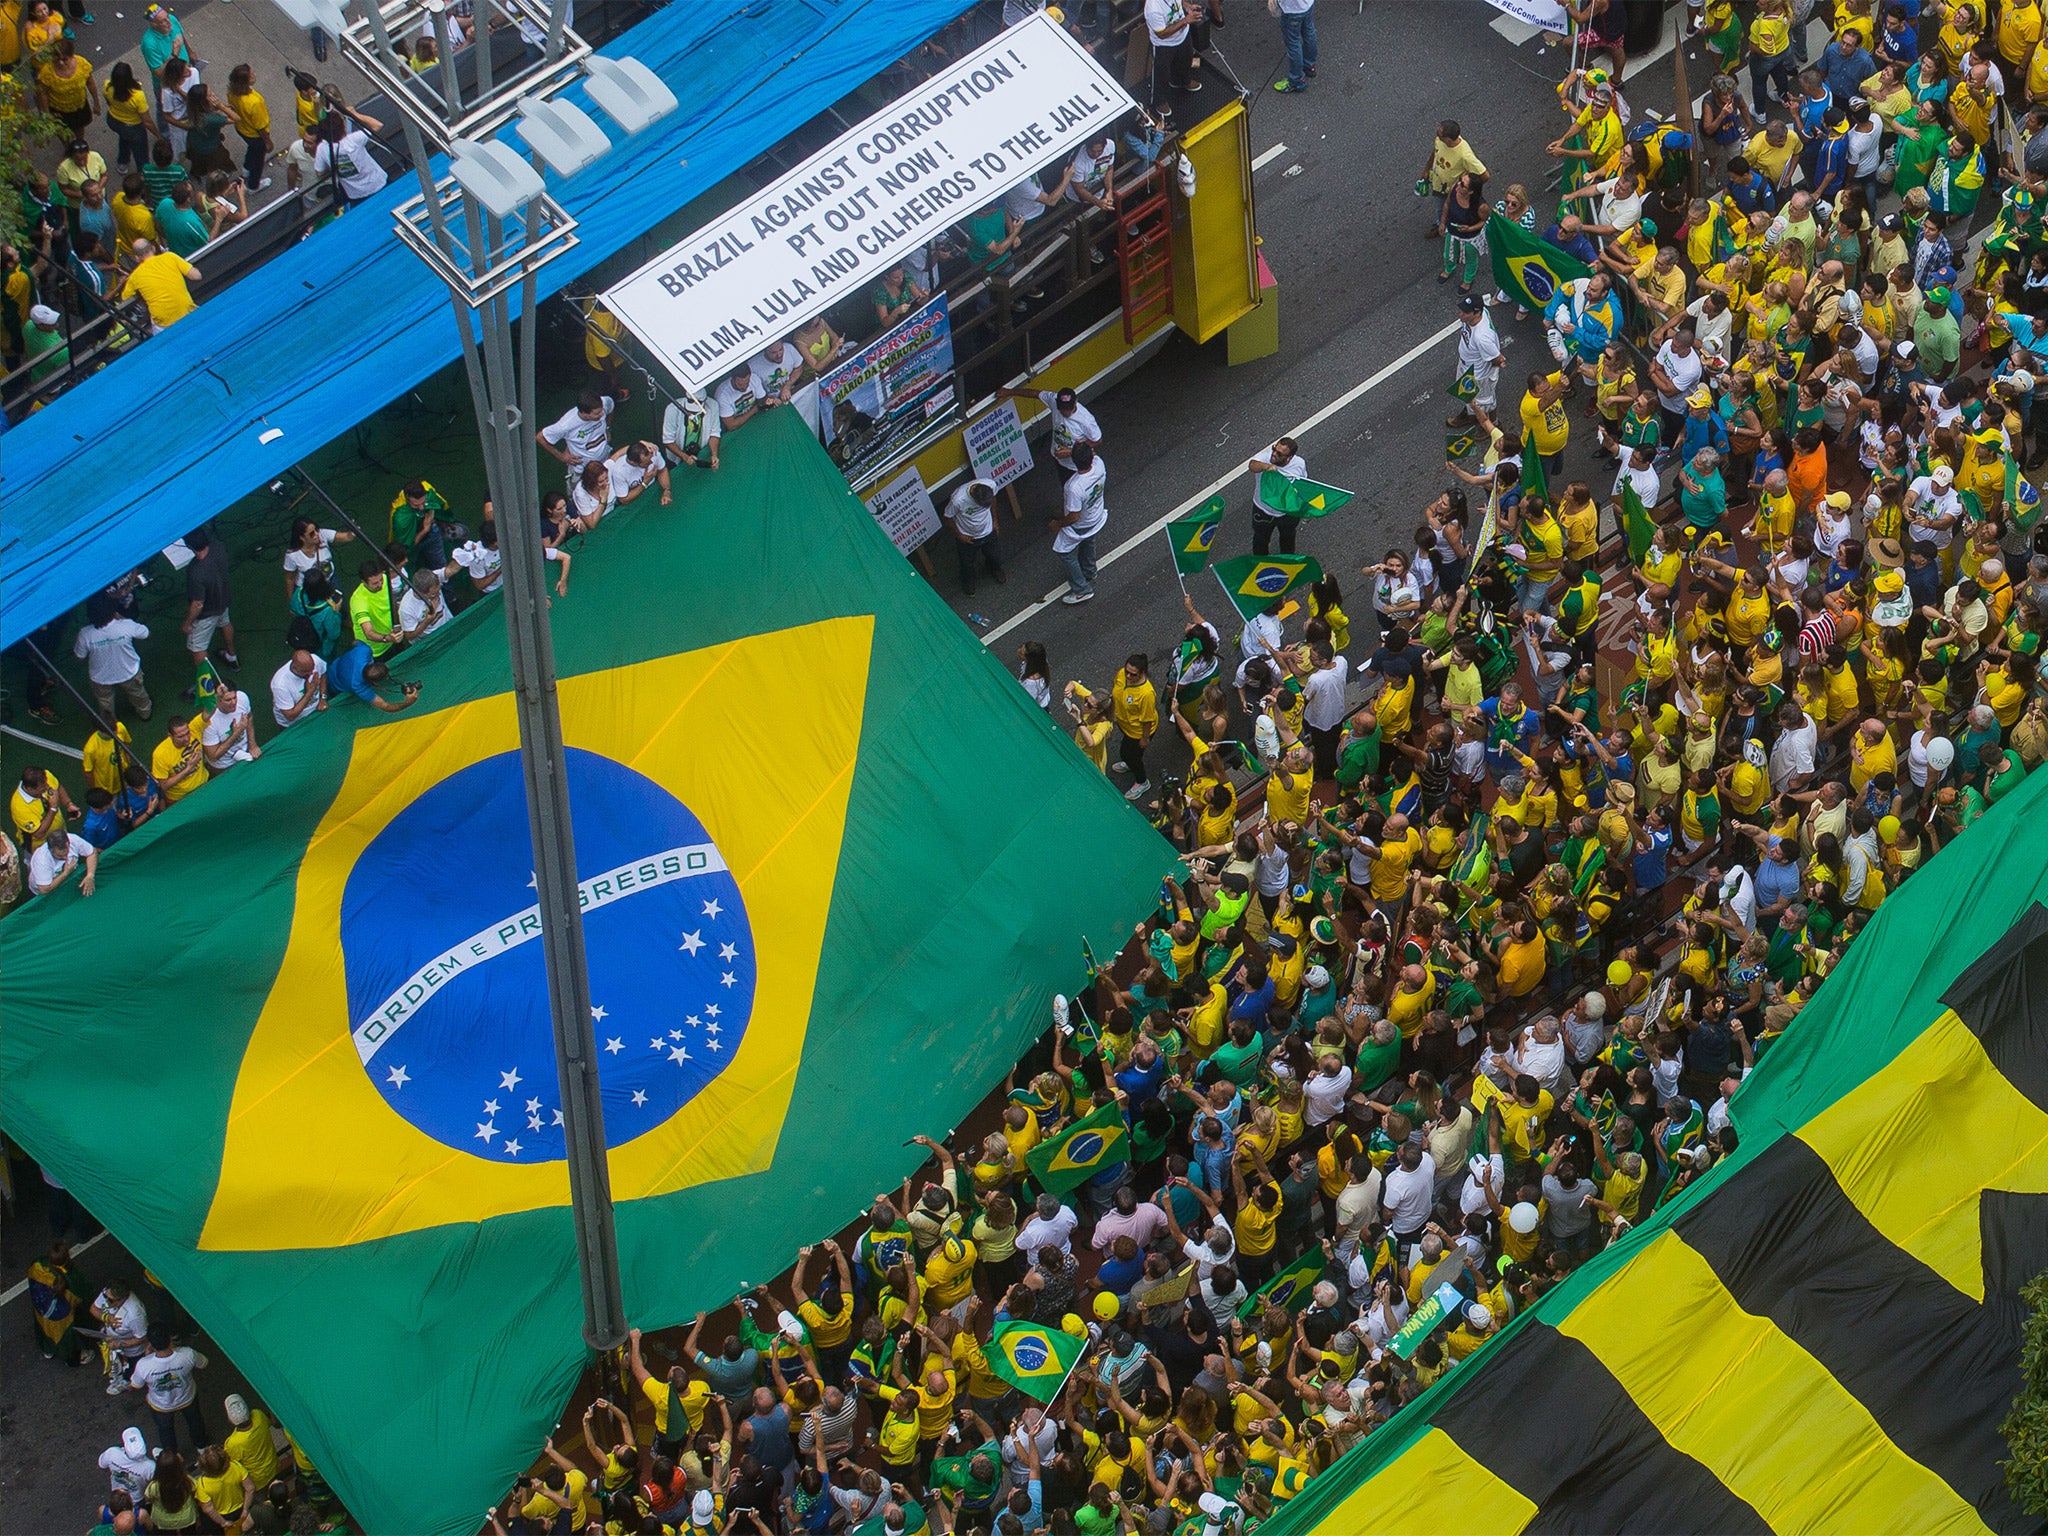 Protesters demanded the removal of President Dilma Rousseff at the weekend in Sao Paulo amid a corruption scandal and a deep economic recession